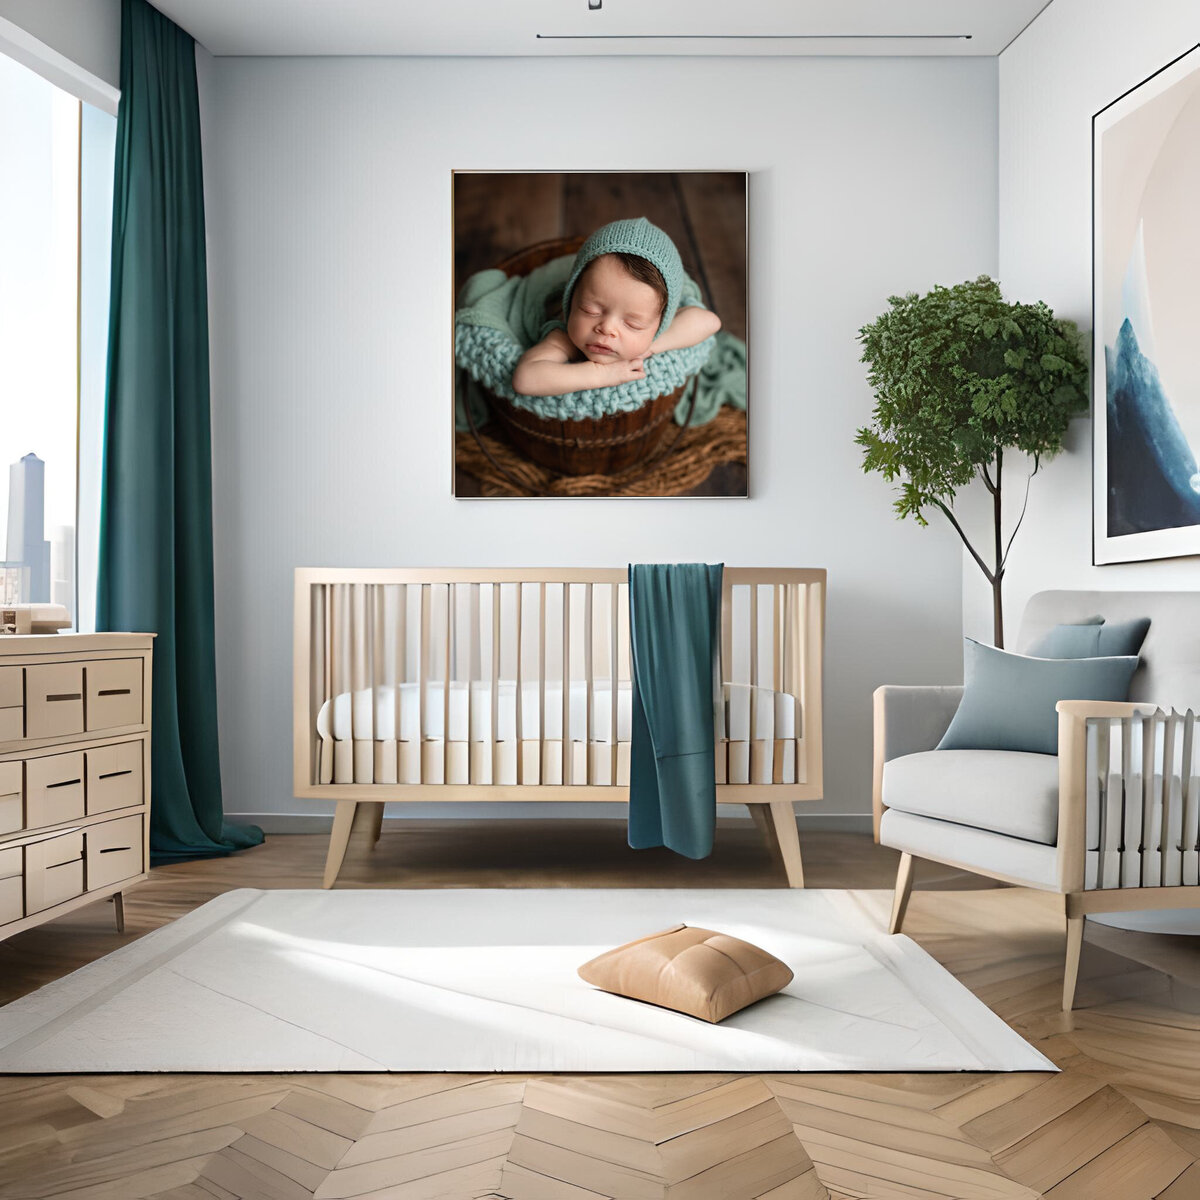 Newborn room with three large statement pieces of artwork.